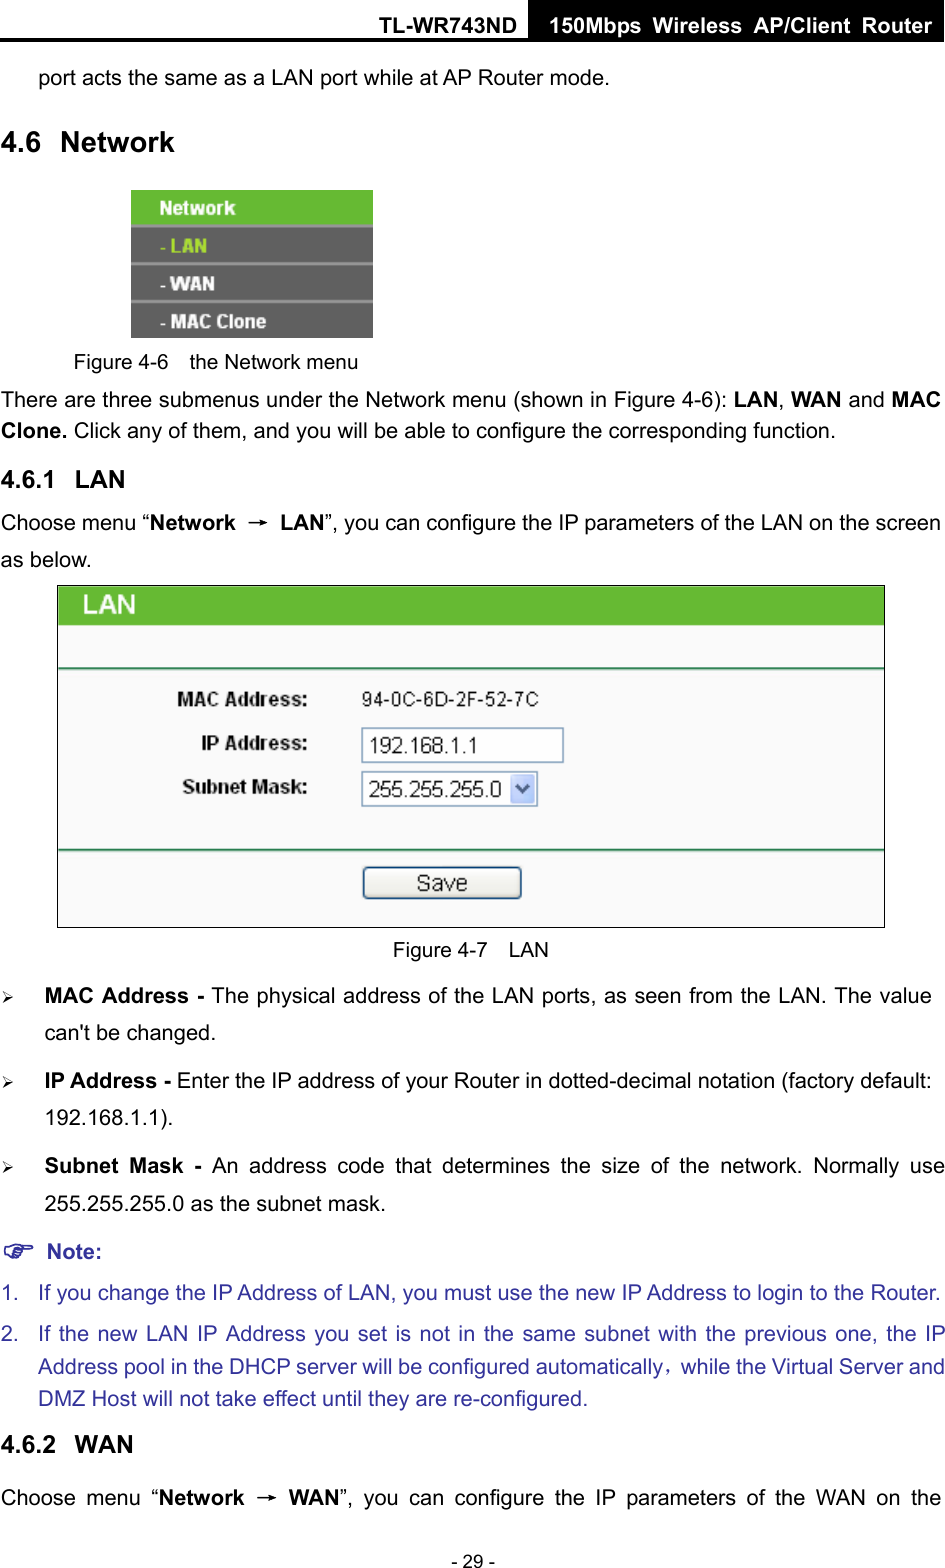 TL-WR743ND 150Mbps Wireless AP/Client Router - 29 - port acts the same as a LAN port while at AP Router mode. 4.6  Network  Figure 4-6  the Network menu There are three submenus under the Network menu (shown in Figure 4-6): LAN, WAN and MAC Clone. Click any of them, and you will be able to configure the corresponding function.   4.6.1  LAN Choose menu “Network  → LAN”, you can configure the IP parameters of the LAN on the screen as below.  Figure 4-7  LAN ¾ MAC Address - The physical address of the LAN ports, as seen from the LAN. The value can&apos;t be changed. ¾ IP Address - Enter the IP address of your Router in dotted-decimal notation (factory default: 192.168.1.1). ¾ Subnet Mask - An address code that determines the size of the network. Normally use 255.255.255.0 as the subnet mask.   ) Note: 1.  If you change the IP Address of LAN, you must use the new IP Address to login to the Router.   2.  If the new LAN IP Address you set is not in the same subnet with the previous one, the IP Address pool in the DHCP server will be configured automatically，while the Virtual Server and DMZ Host will not take effect until they are re-configured. 4.6.2  WAN Choose menu “Network  → WAN”, you can configure the IP parameters of the WAN on the 